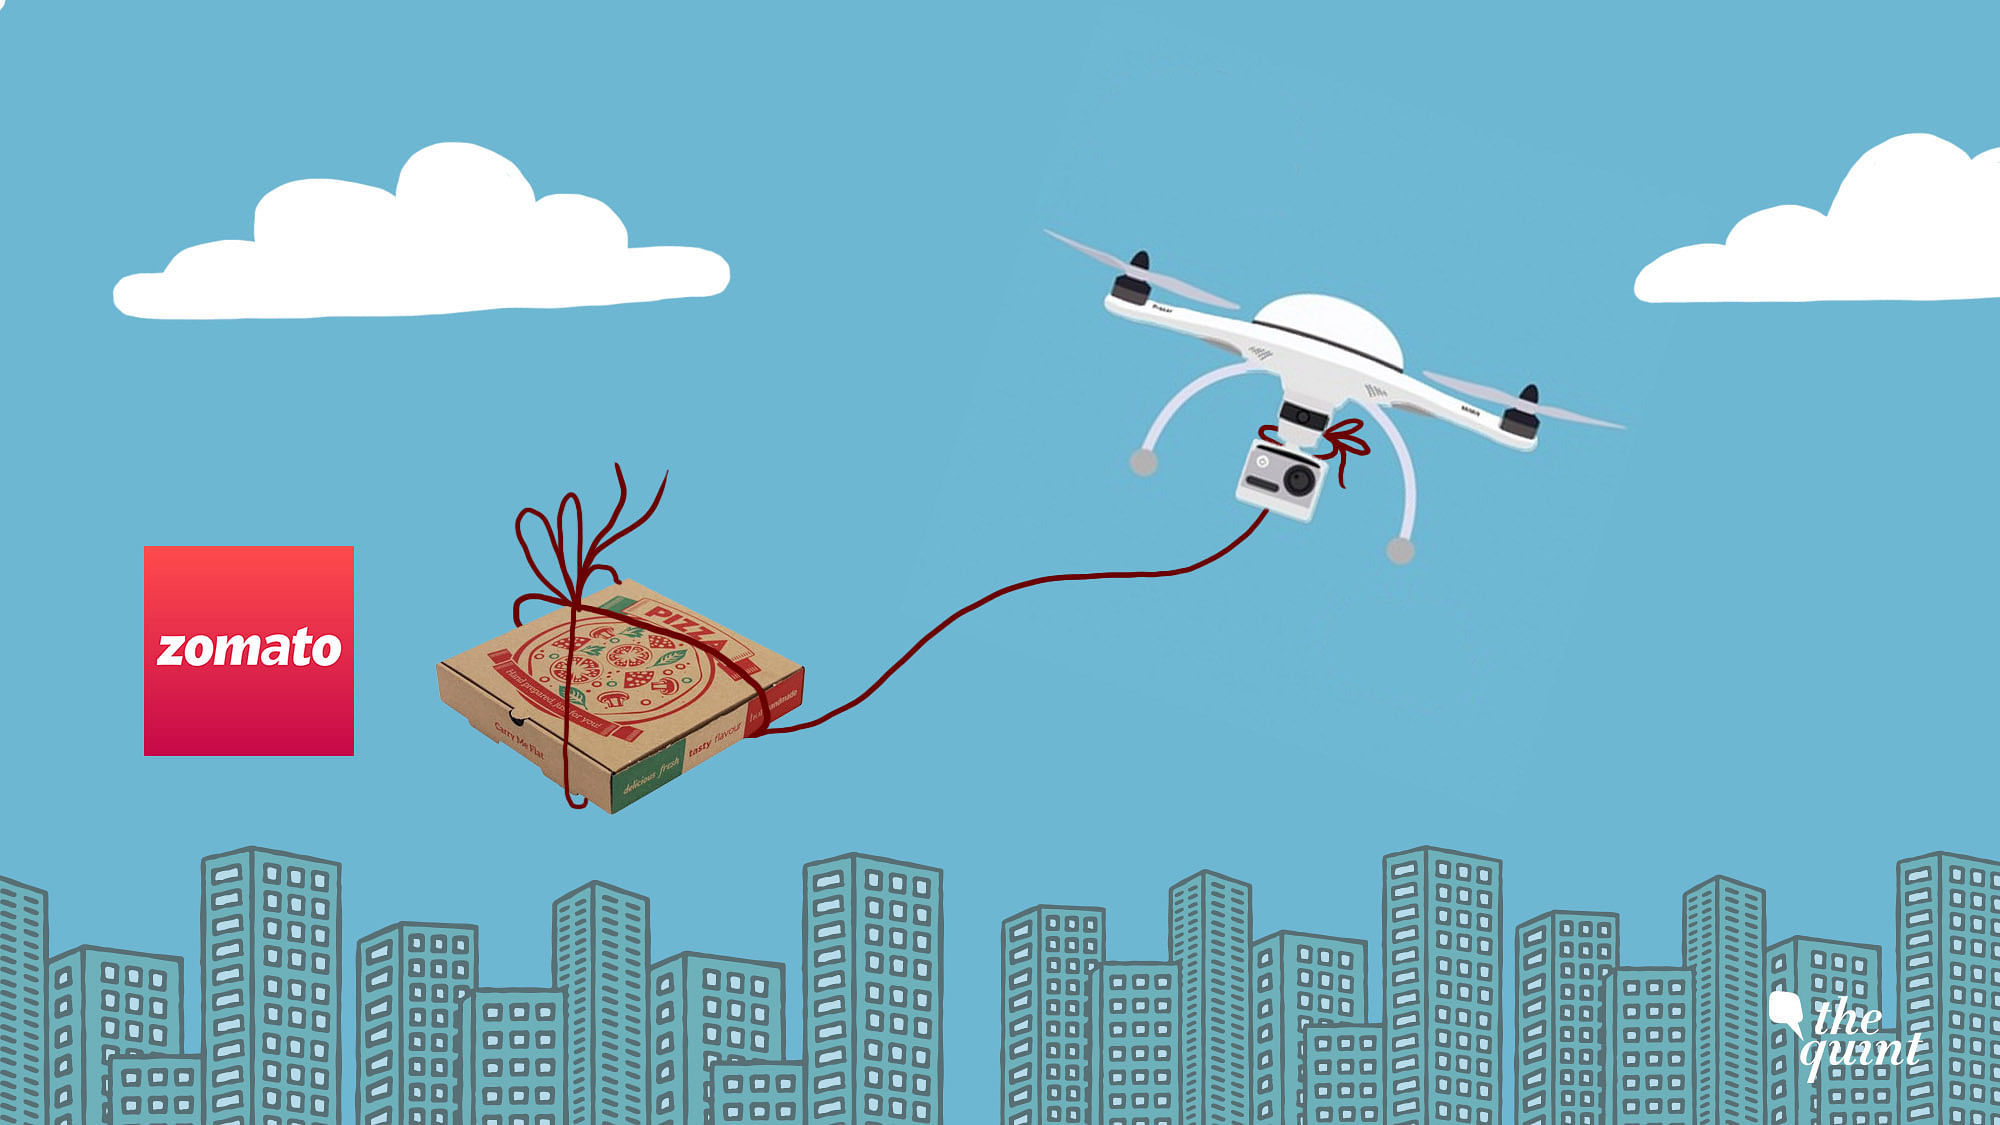 Zomato is keen to push for delivery of food via drone in India.